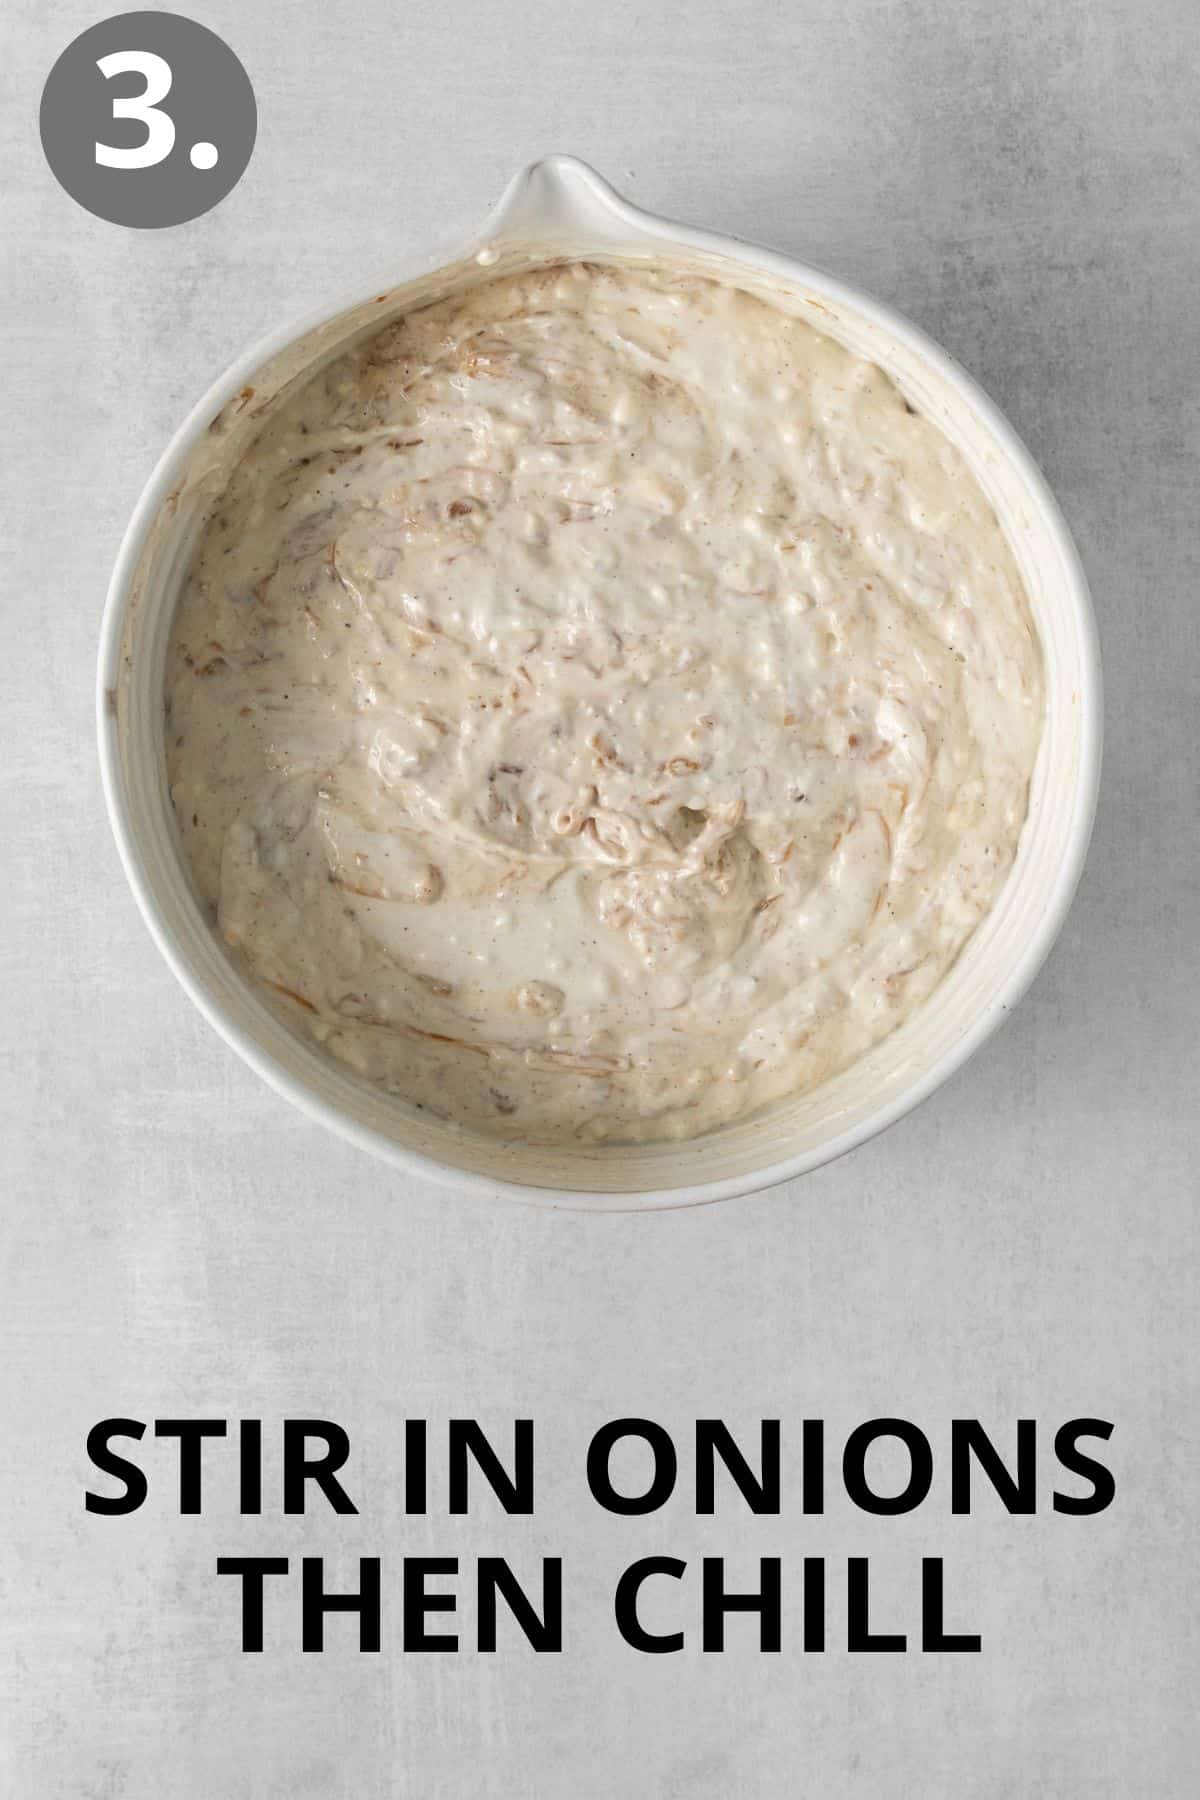 Onions in a bowl of dip